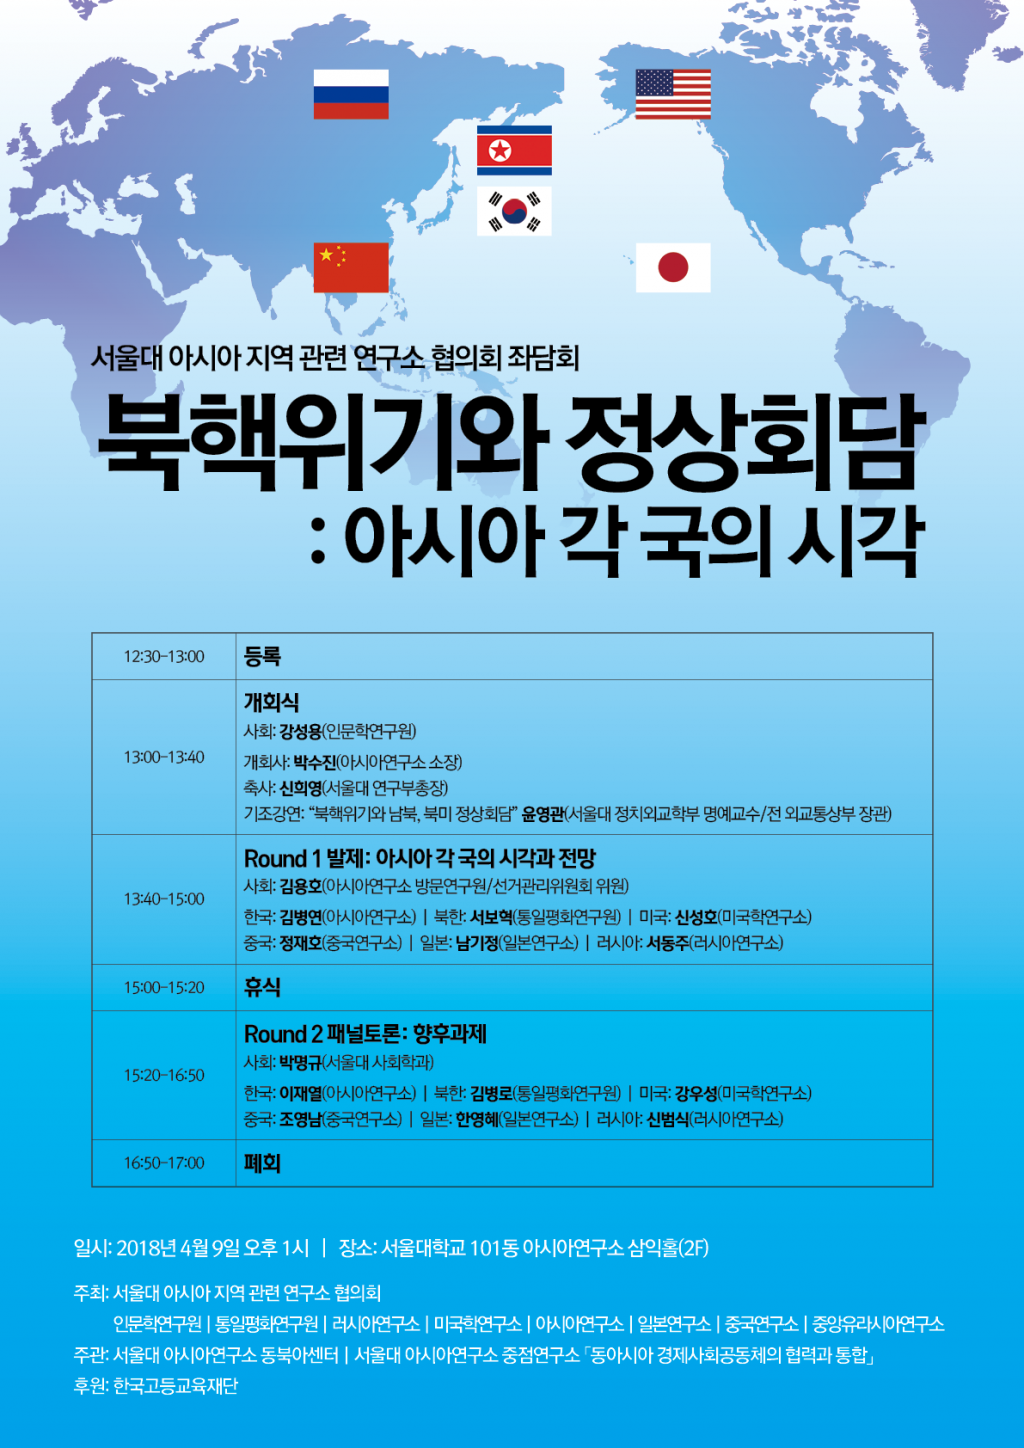 North Korean Nuclear Crisis and Summit Meeting in East Asia: Perspectives of Asian Countries